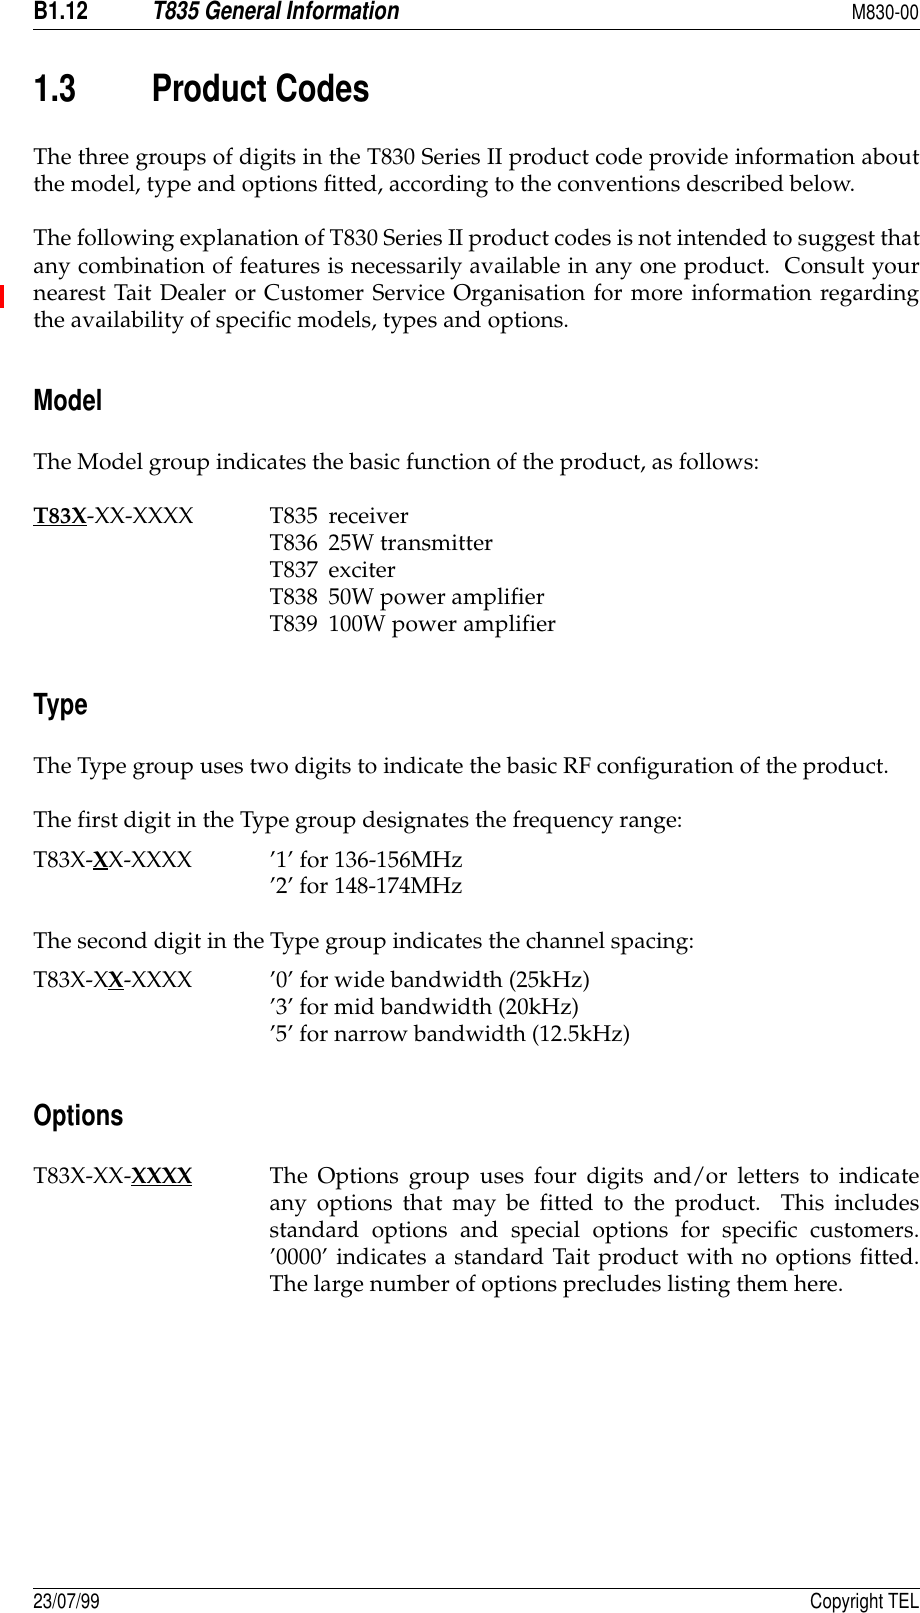 B1.12T835 General InformationM830-0023/07/99 Copyright TEL1.3 Product CodesThe three groups of digits in the T830 Series II product code provide information aboutthe model, type and options fitted, according to the conventions described below.The following explanation of T830 Series II product codes is not intended to suggest thatany combination of features is necessarily available in any one product.  Consult yournearest Tait Dealer or Customer Service Organisation for more information regardingthe availability of specific models, types and options.ModelThe Model group indicates the basic function of the product, as follows:T83X-XX-XXXX T835 receiverT836 25W transmitterT837 exciterT838 50W power amplifierT839 100W power amplifierTypeThe Type group uses two digits to indicate the basic RF configuration of the product.The first digit in the Type group designates the frequency range:T83X-XX-XXXX ’1’ for 136-156MHz’2’ for 148-174MHzThe second digit in the Type group indicates the channel spacing:T83X-XX-XXXX ’0’ for wide bandwidth (25kHz)’3’ for mid bandwidth (20kHz)’5’ for narrow bandwidth (12.5kHz)OptionsT83X-XX-XXXX The Options group uses four digits and/or letters to indicateany options that may be fitted to the product.  This includesstandard options and special options for specific customers.’0000’ indicates a standard Tait product with no options fitted.The large number of options precludes listing them here.